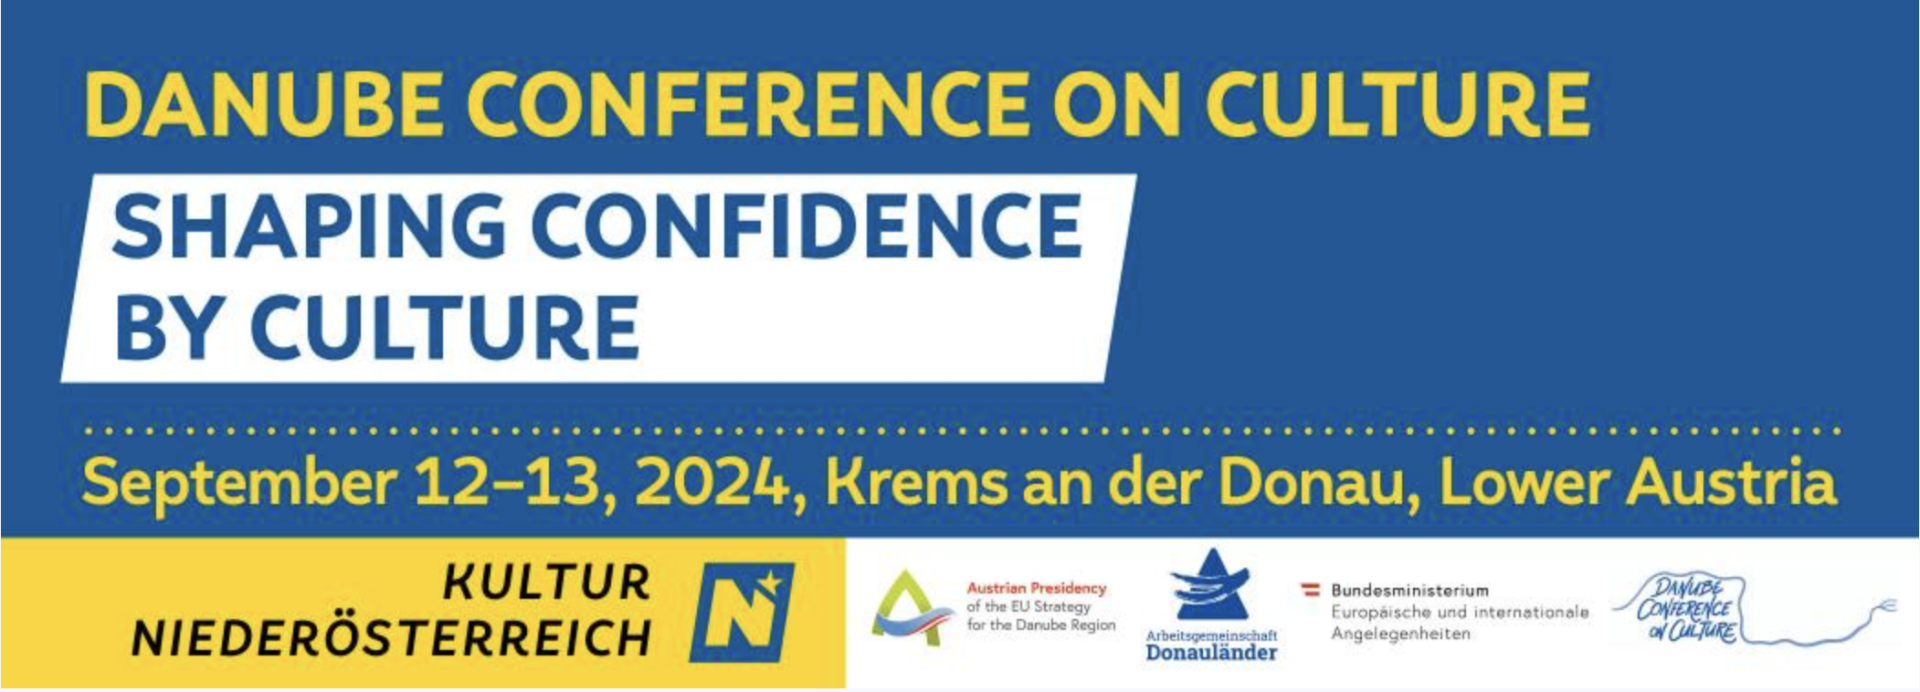 11th International Danube Conference on Culture: SHAPING CONFIDENCE BY CULTURE